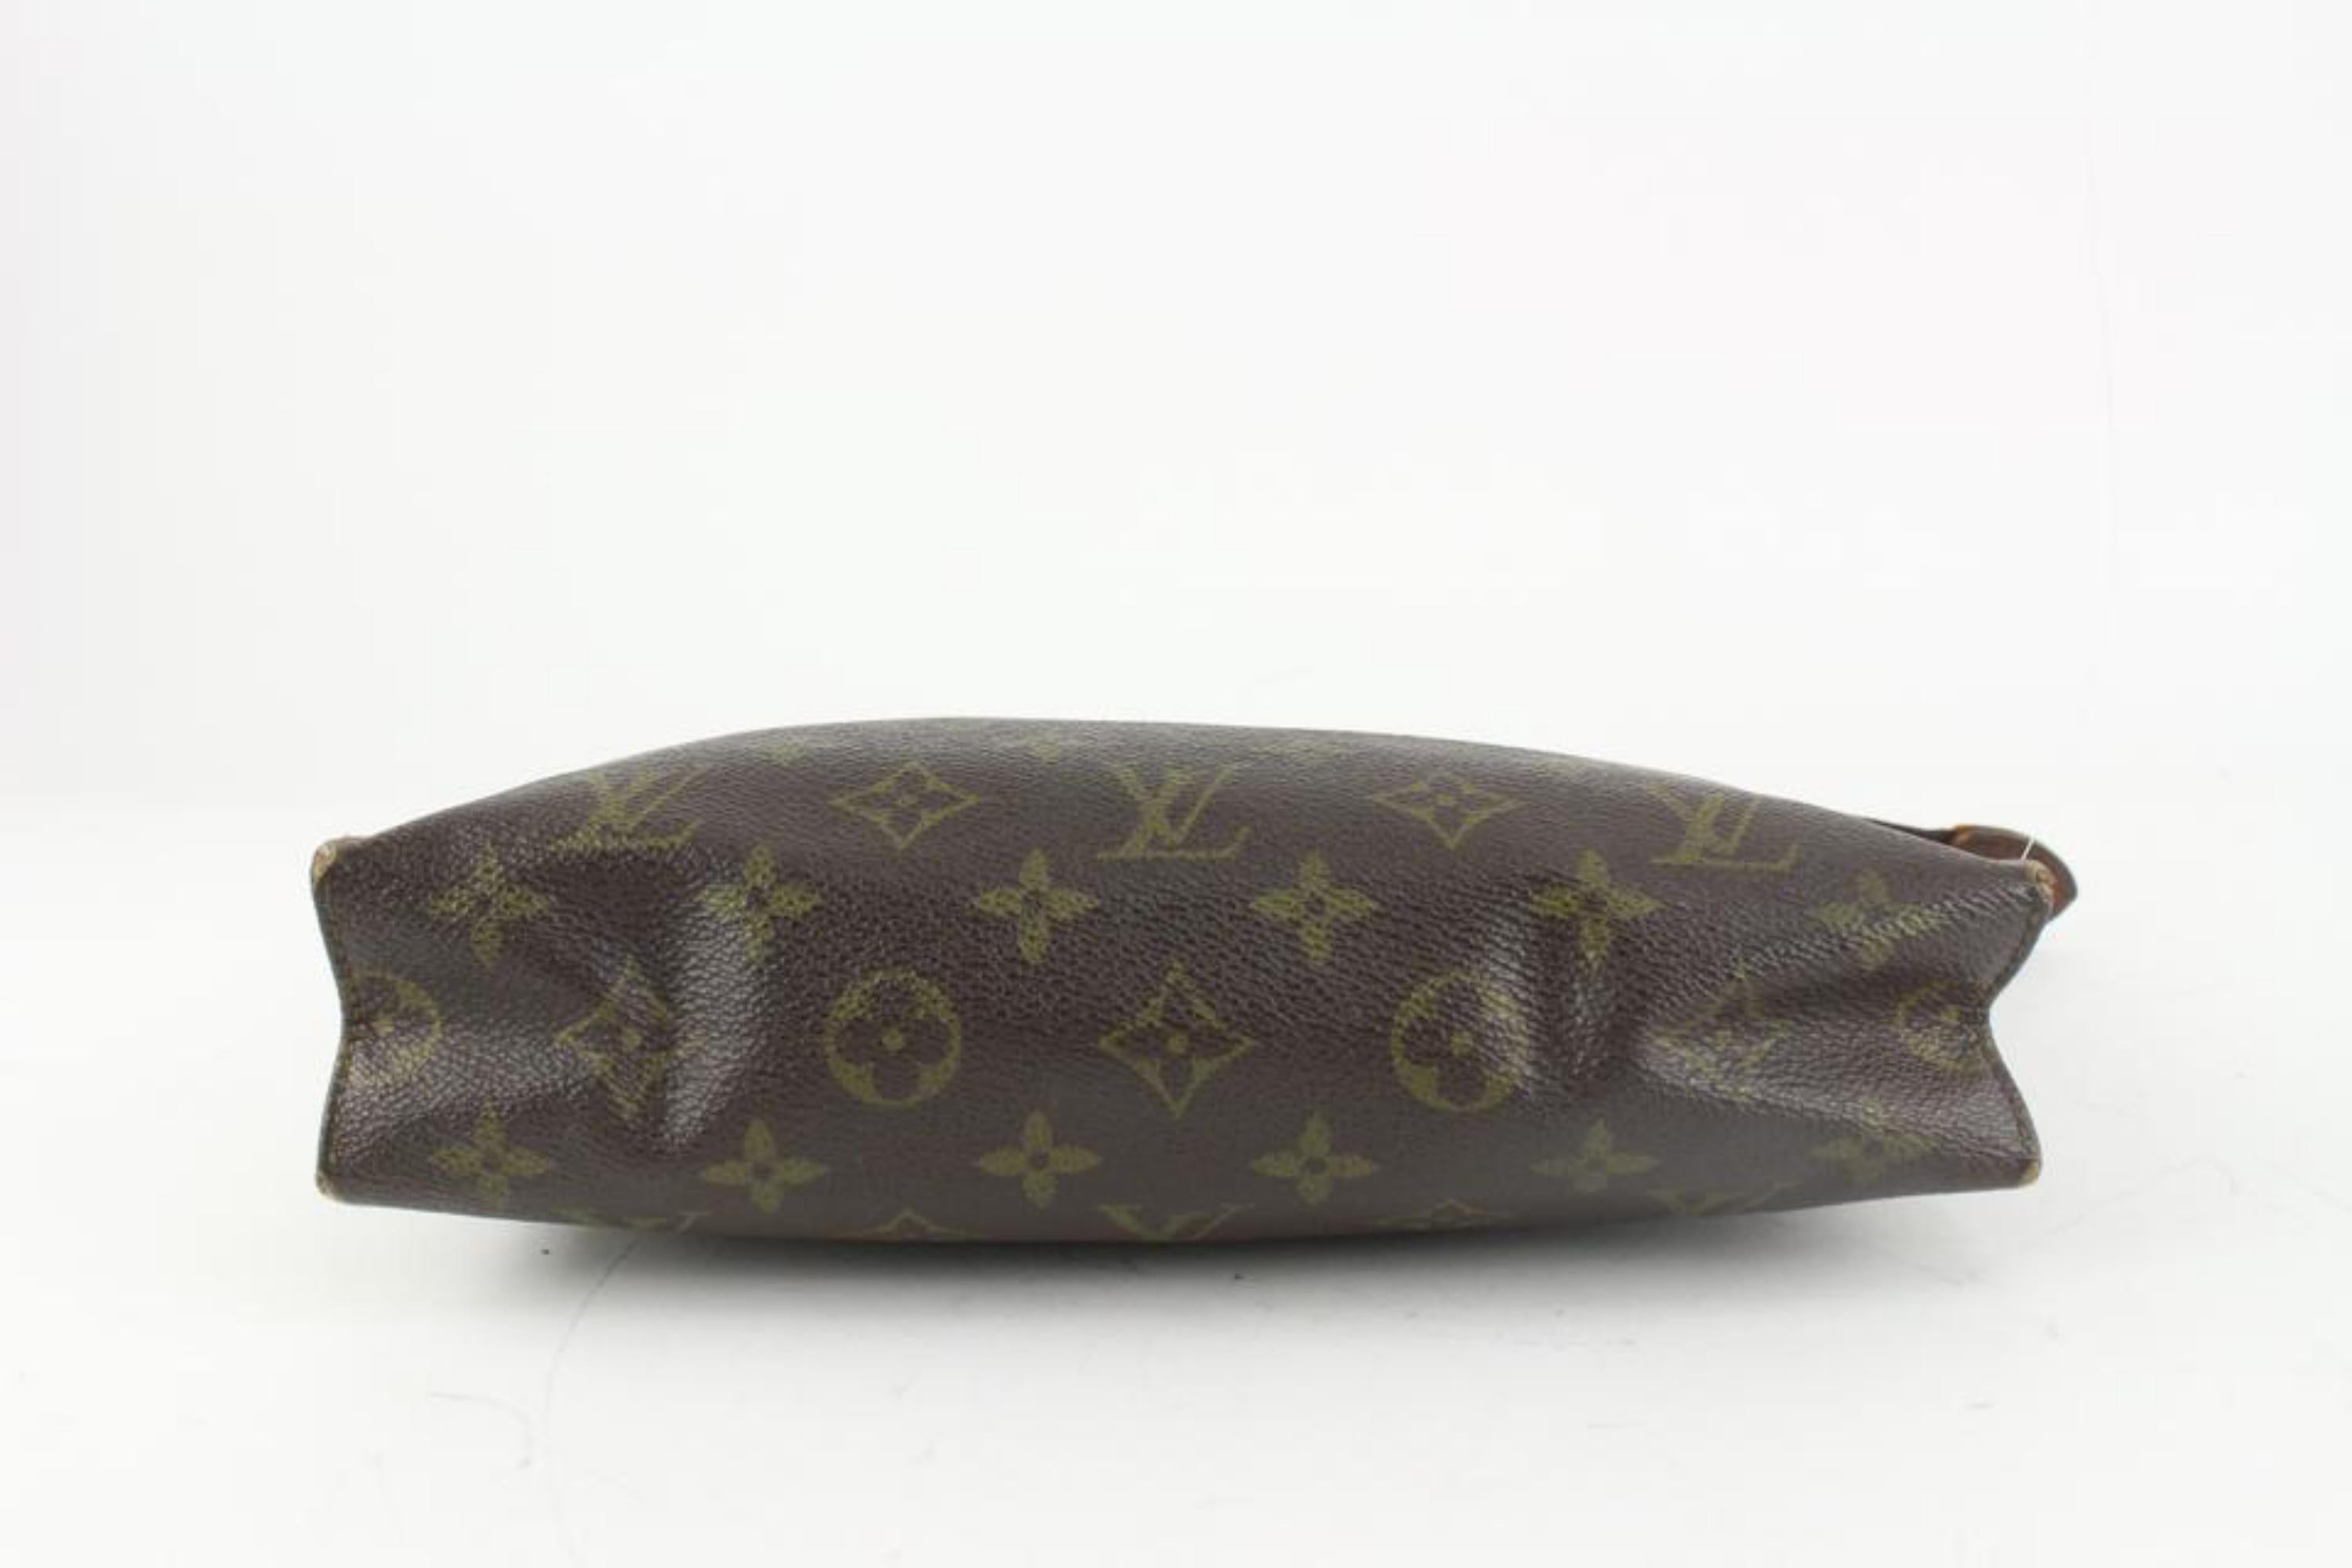 Louis Vuitton Discontinued Monogram Toiletry Pouch 26 Poche Toilette 1216lv49 In Fair Condition For Sale In Dix hills, NY